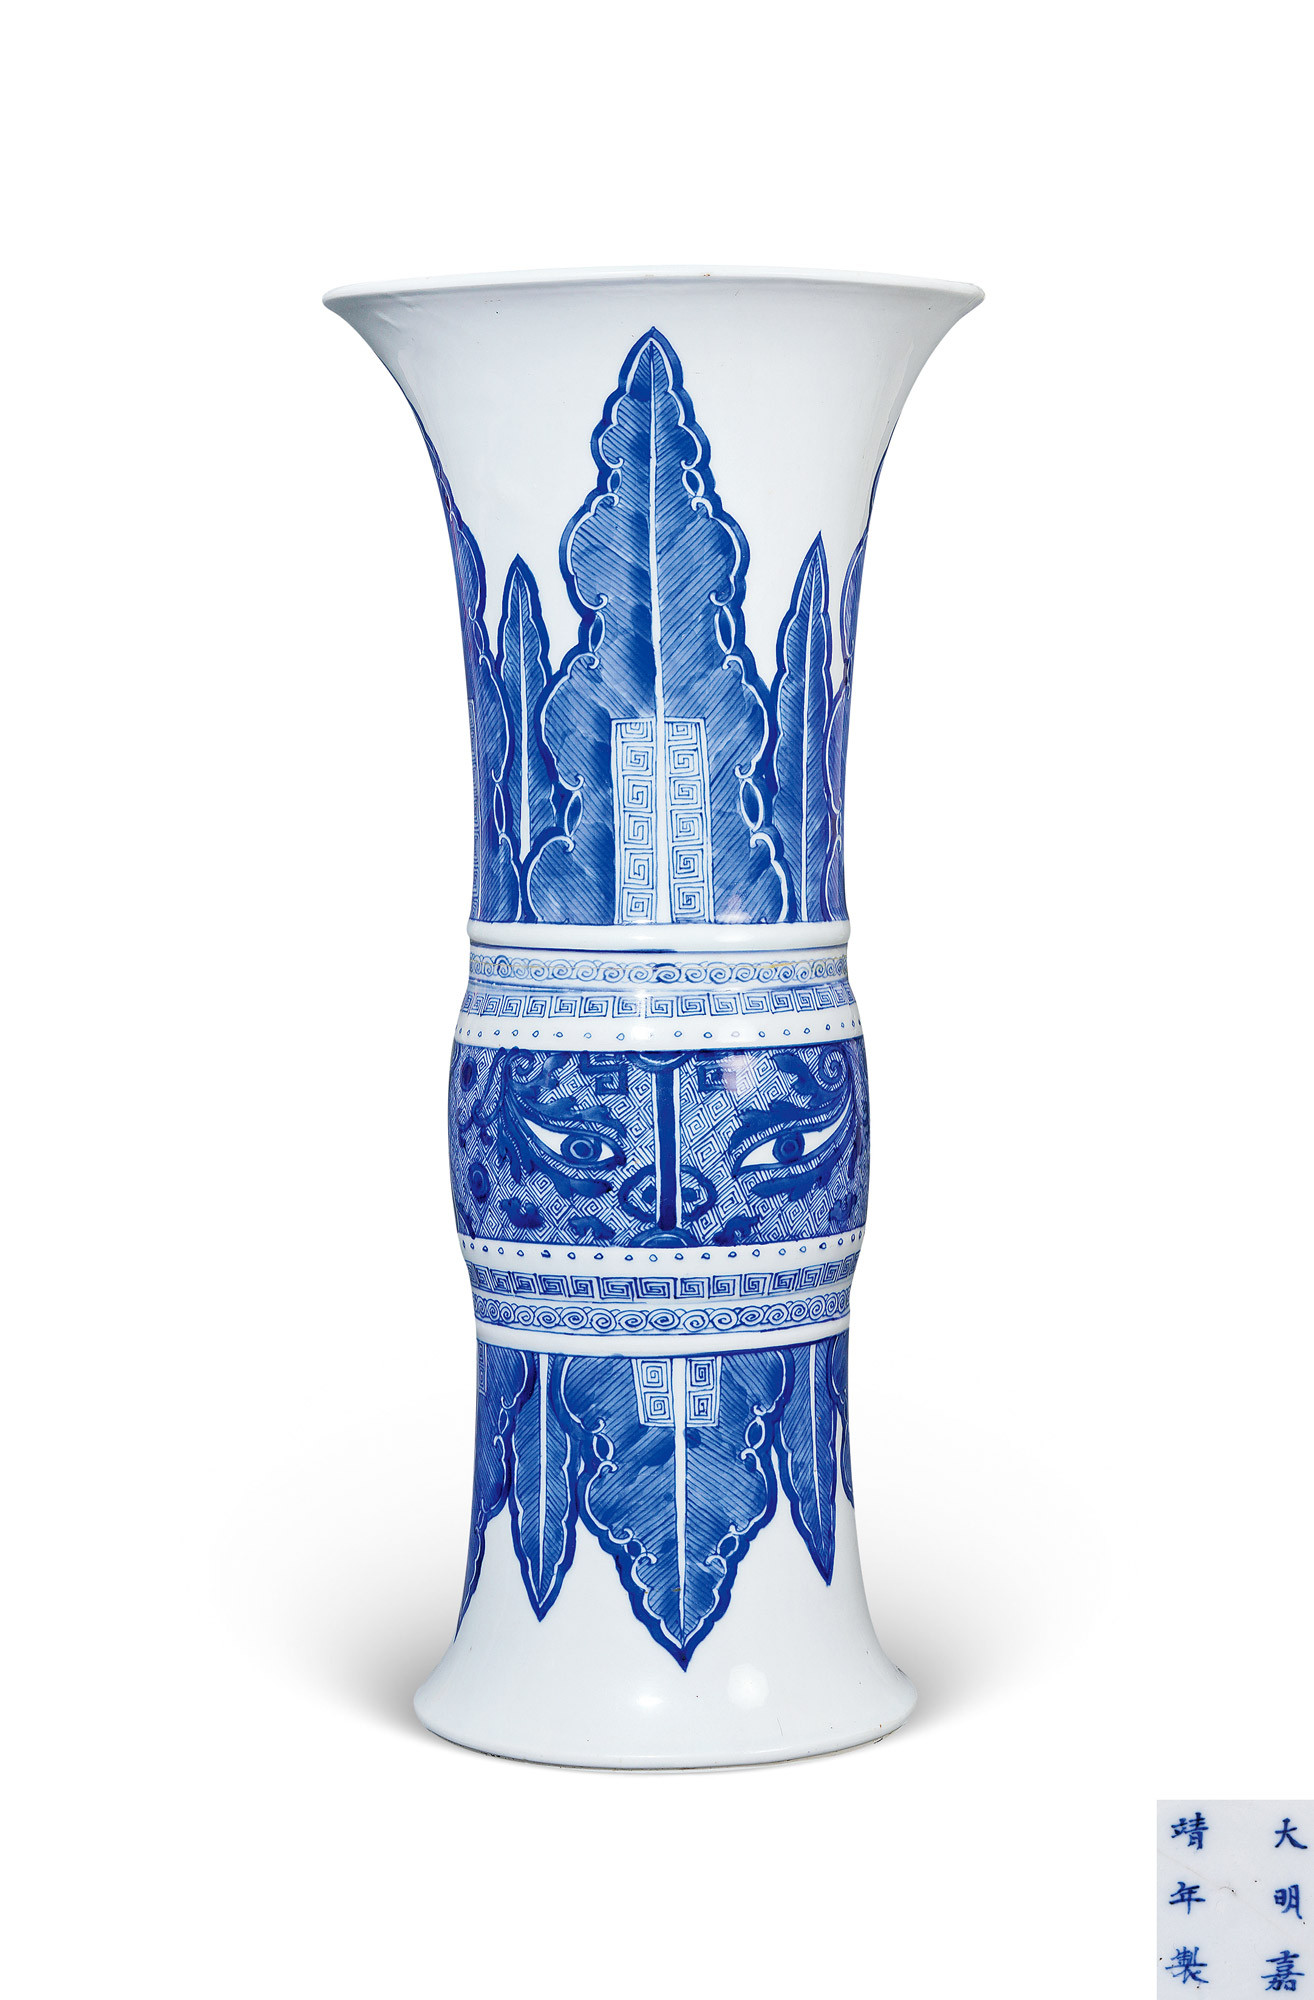 A BLUE AND WHITE BEAKER-SHAPED VASE WITH MYSTICAL BEAST DESIGN